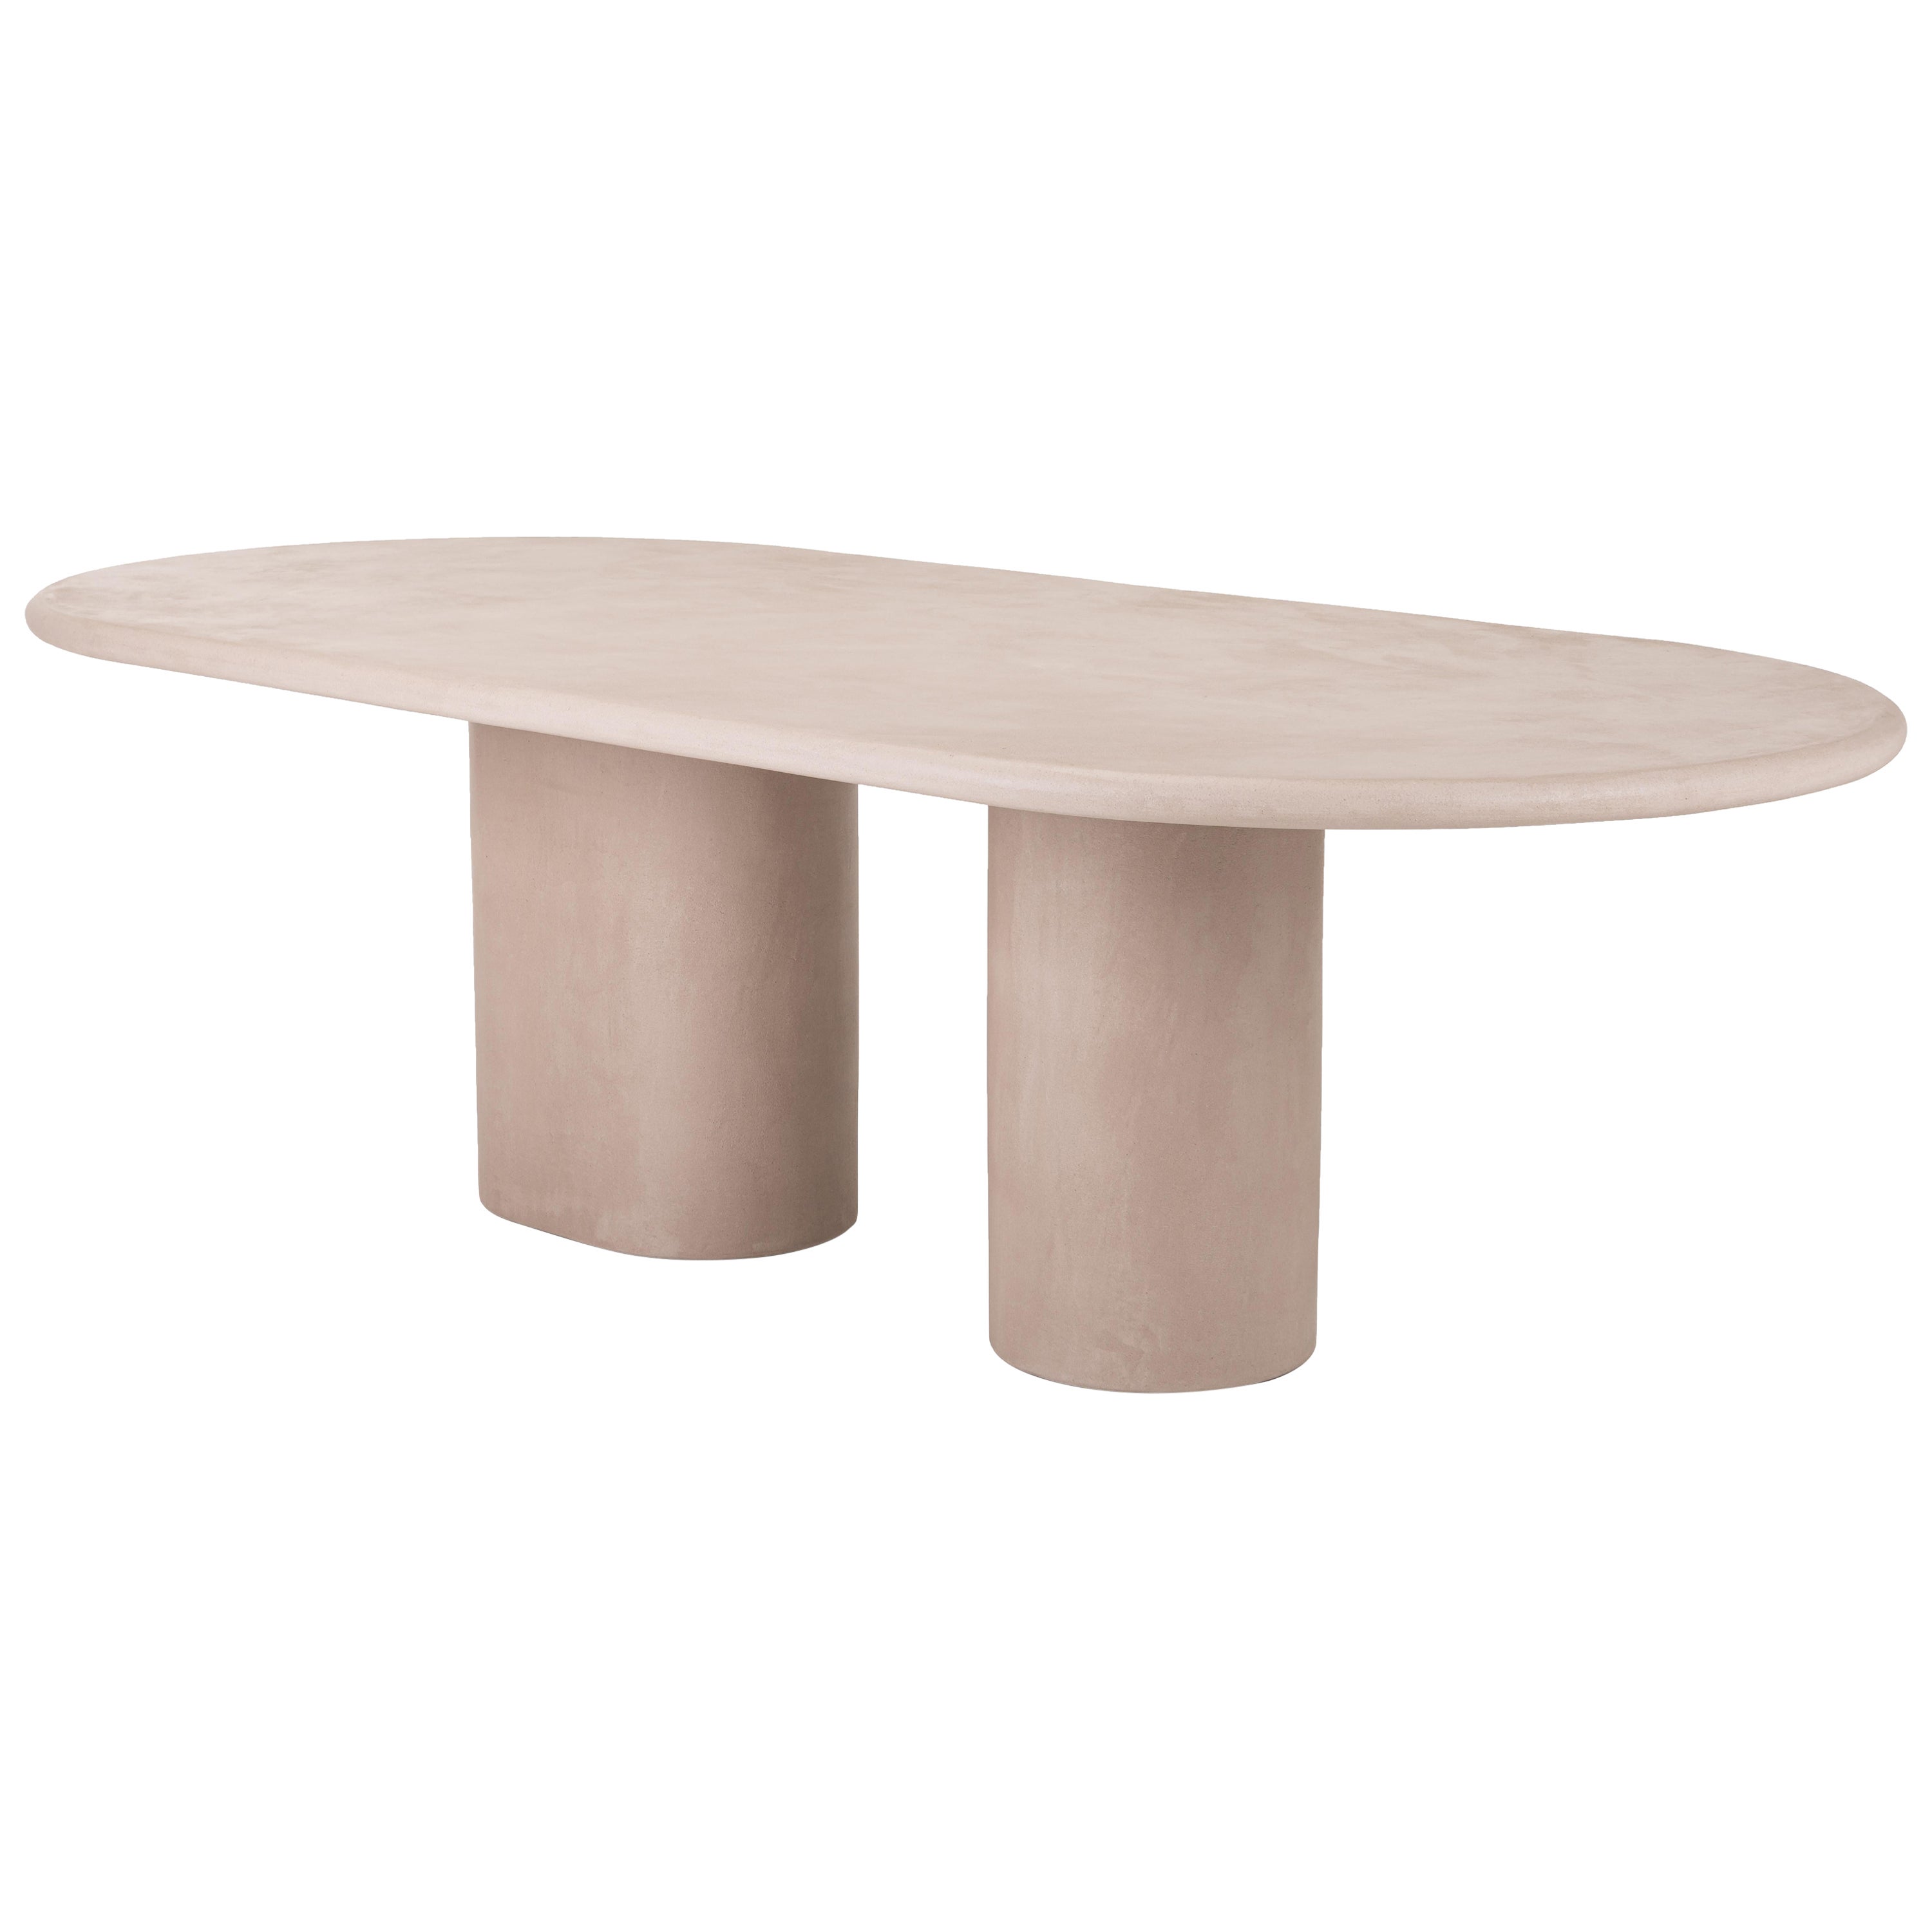 Natural Plaster Dining Table "Column" 300 by Isabelle Beaumont